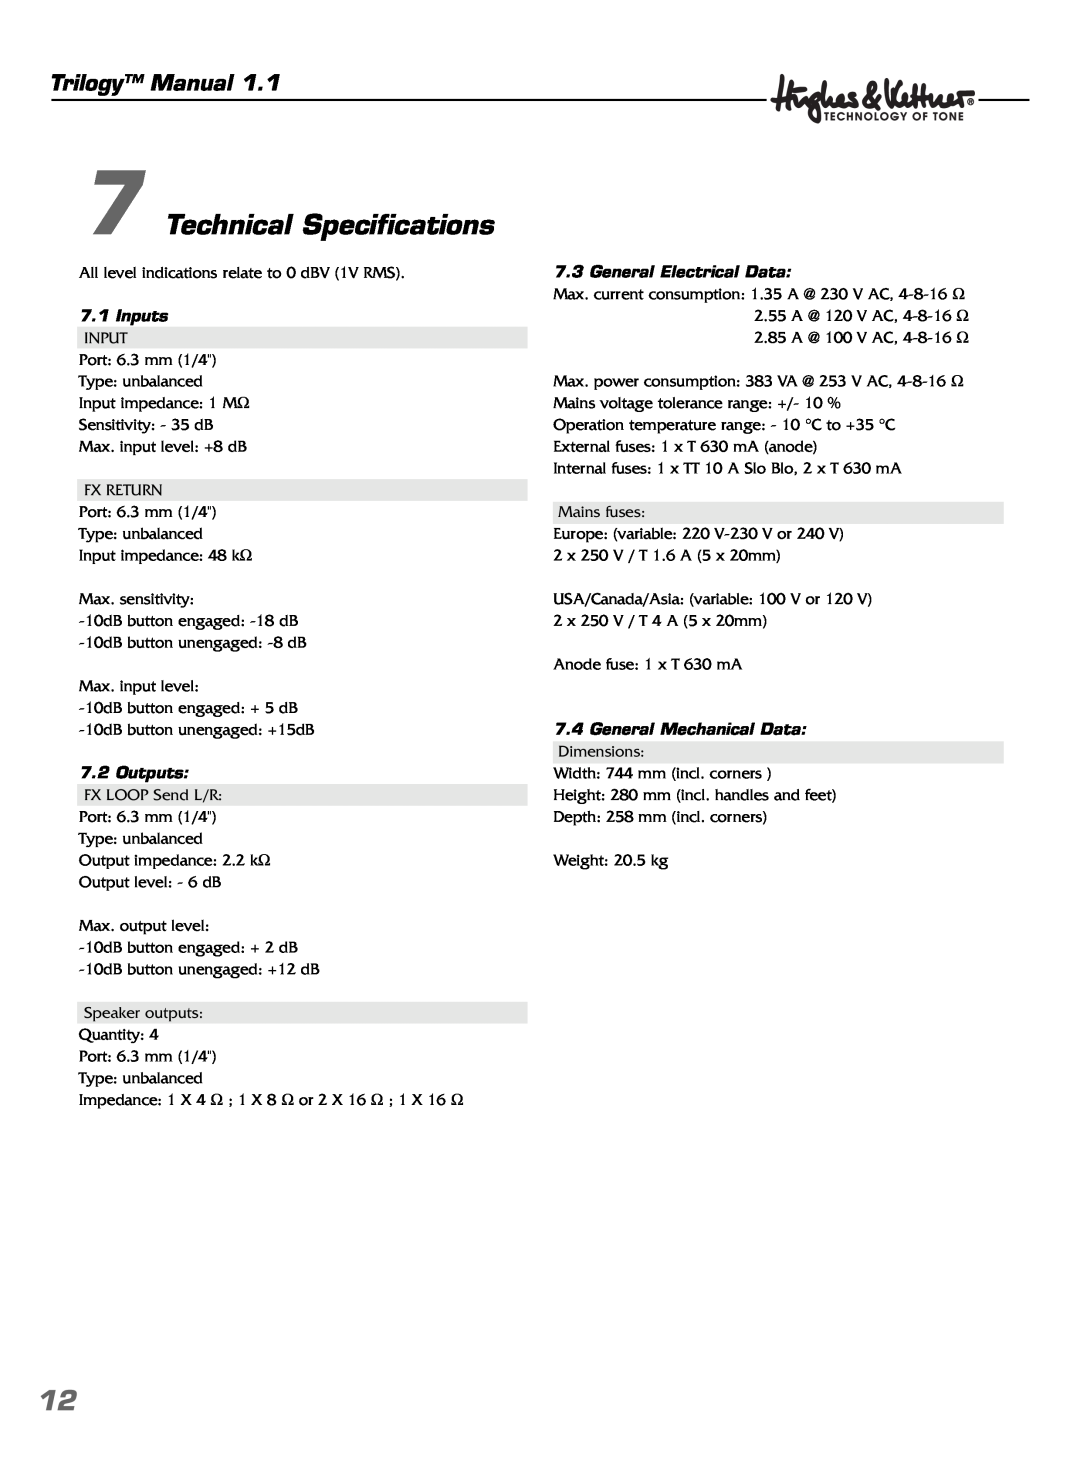 Hughes & Kettner TrilogyTM manual Technical Specifications, Trilogy Manual, Inputs, Outputs, General Electrical Data 